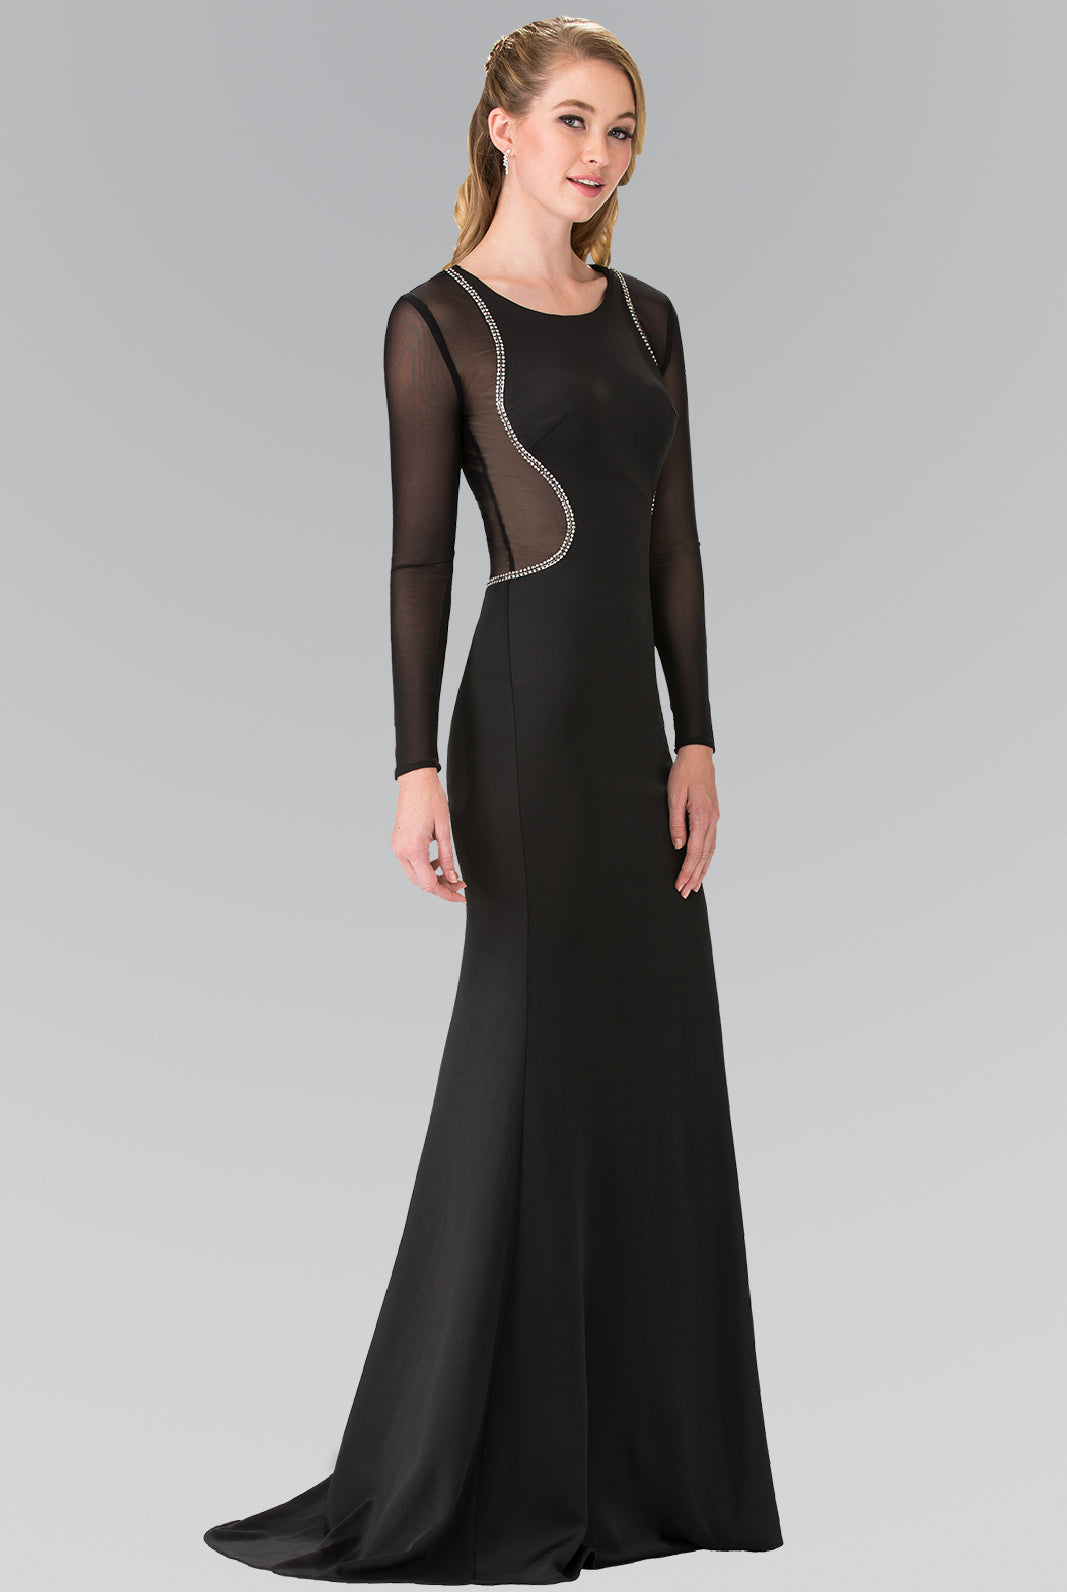 Sheer Long Sleeve Jersey Long Dress Accented with Beaded Details-smcdress